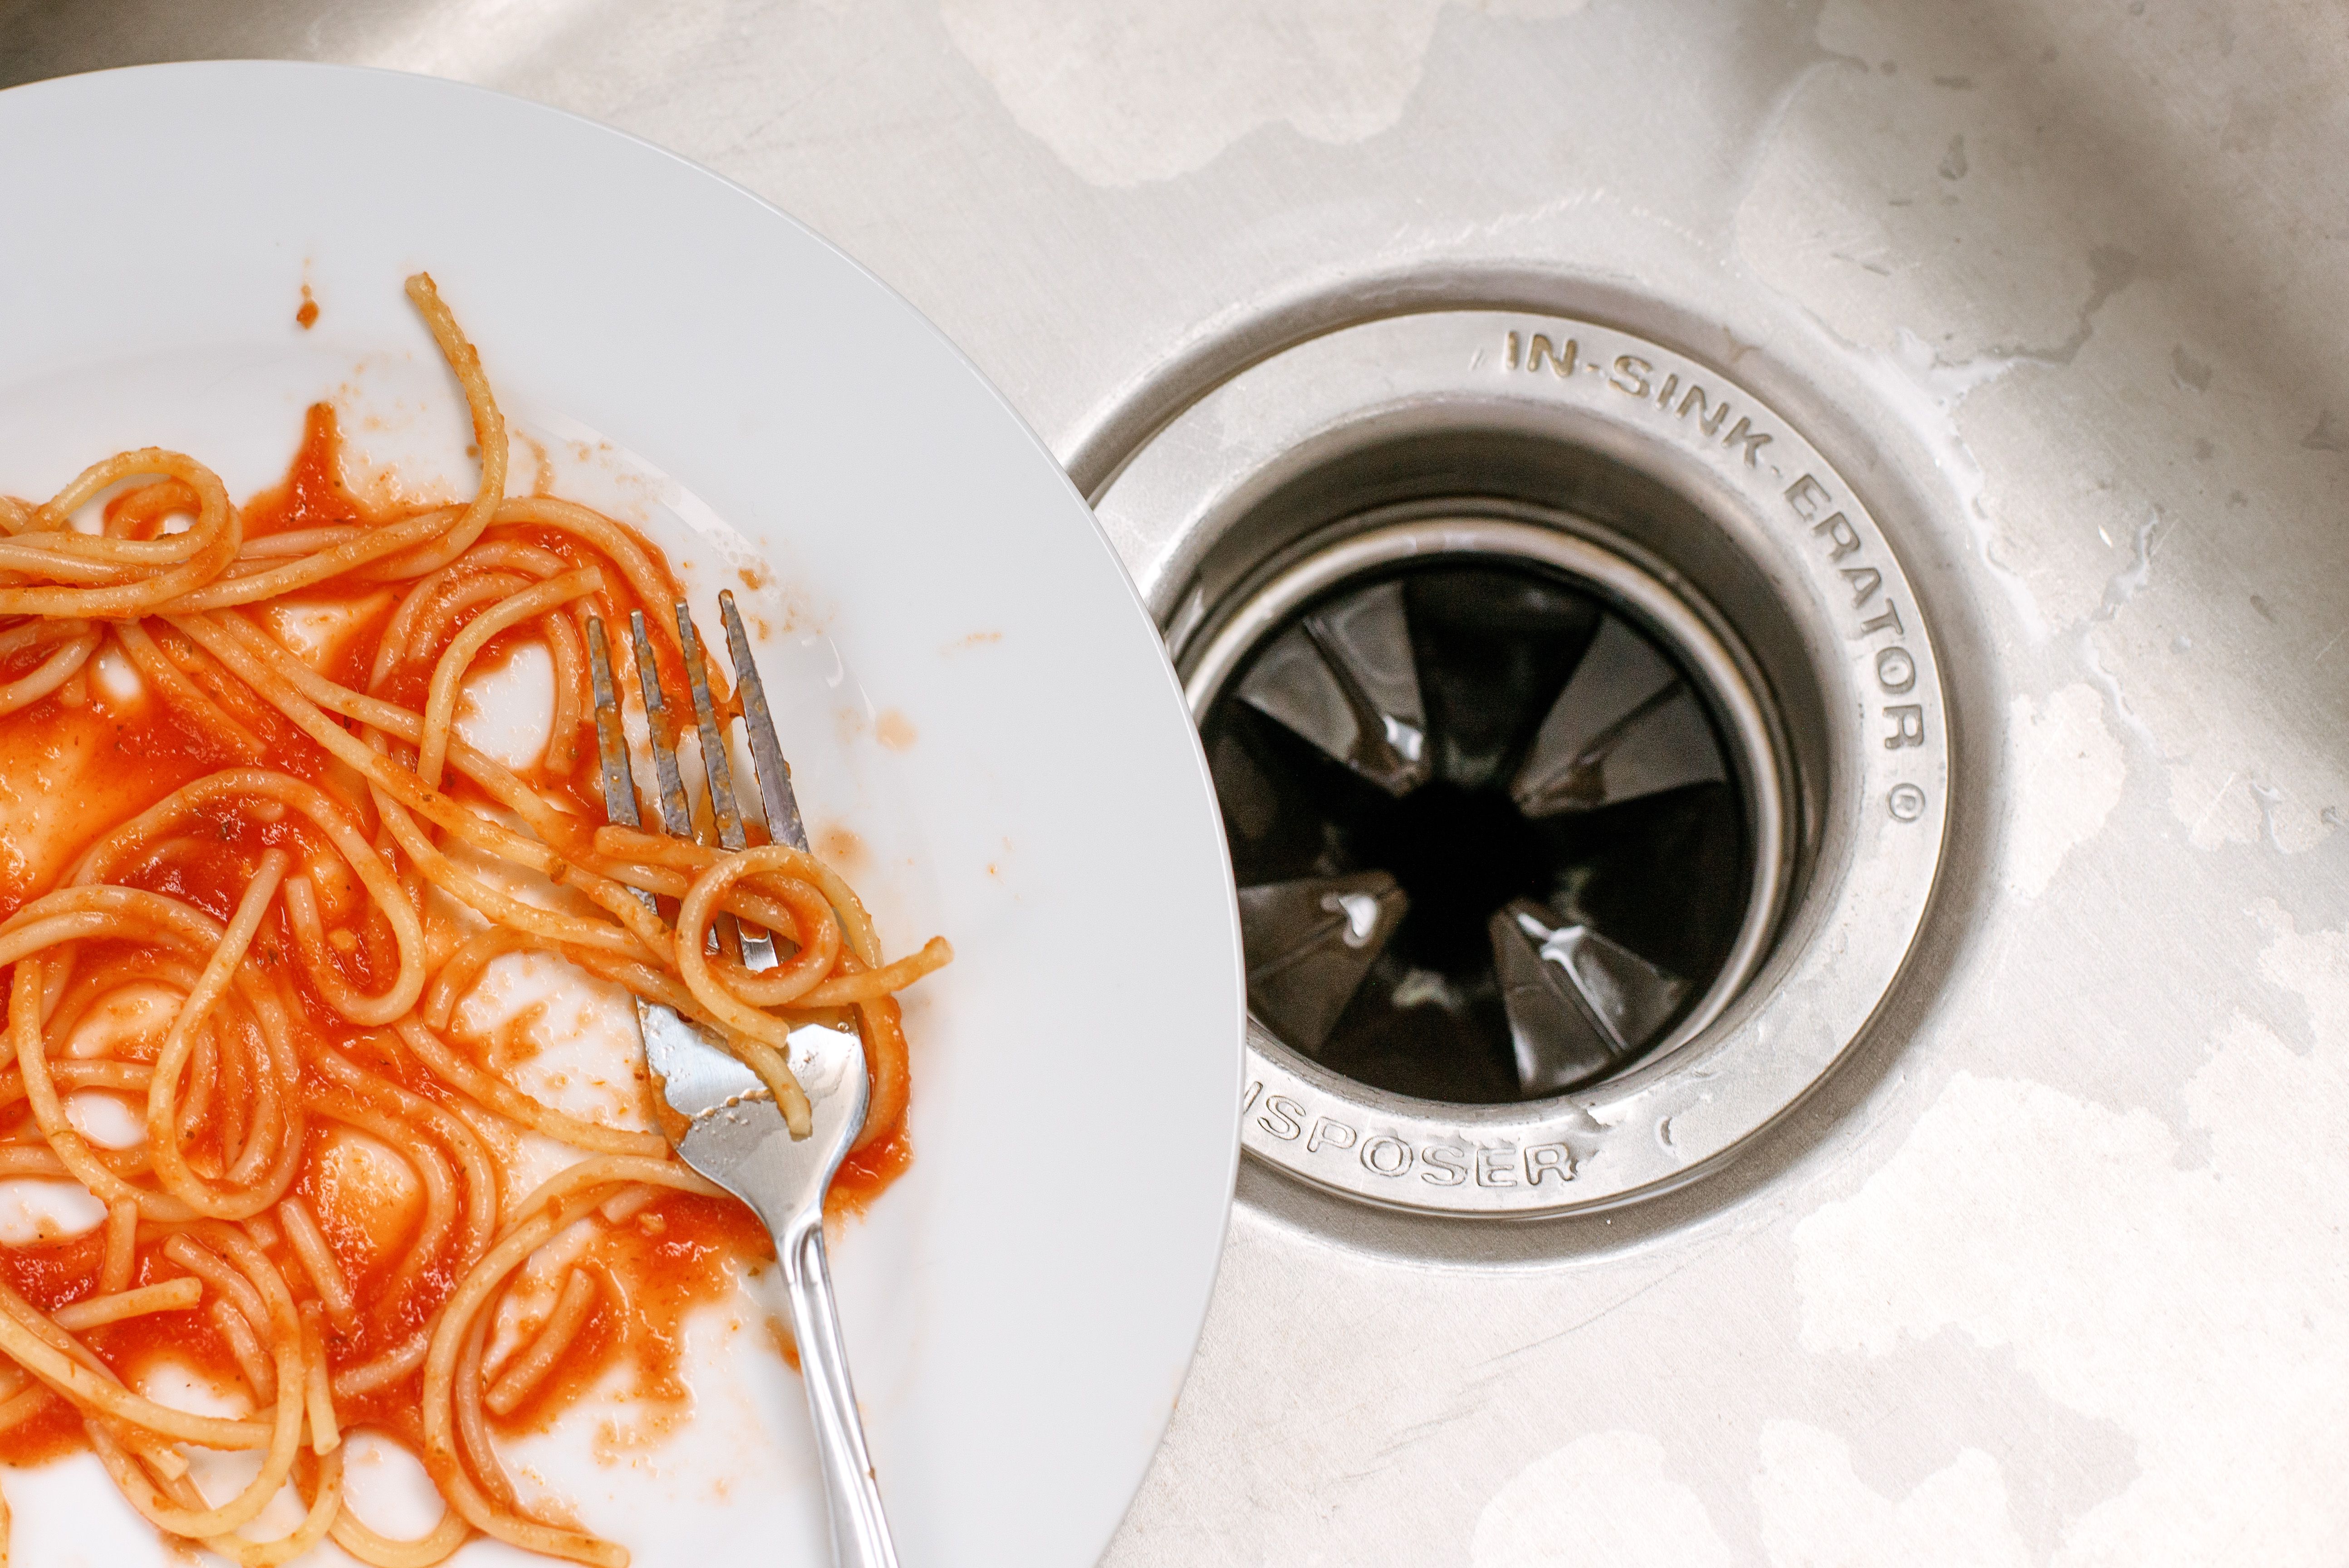 10 Items That Should Never Go Down Your Drains